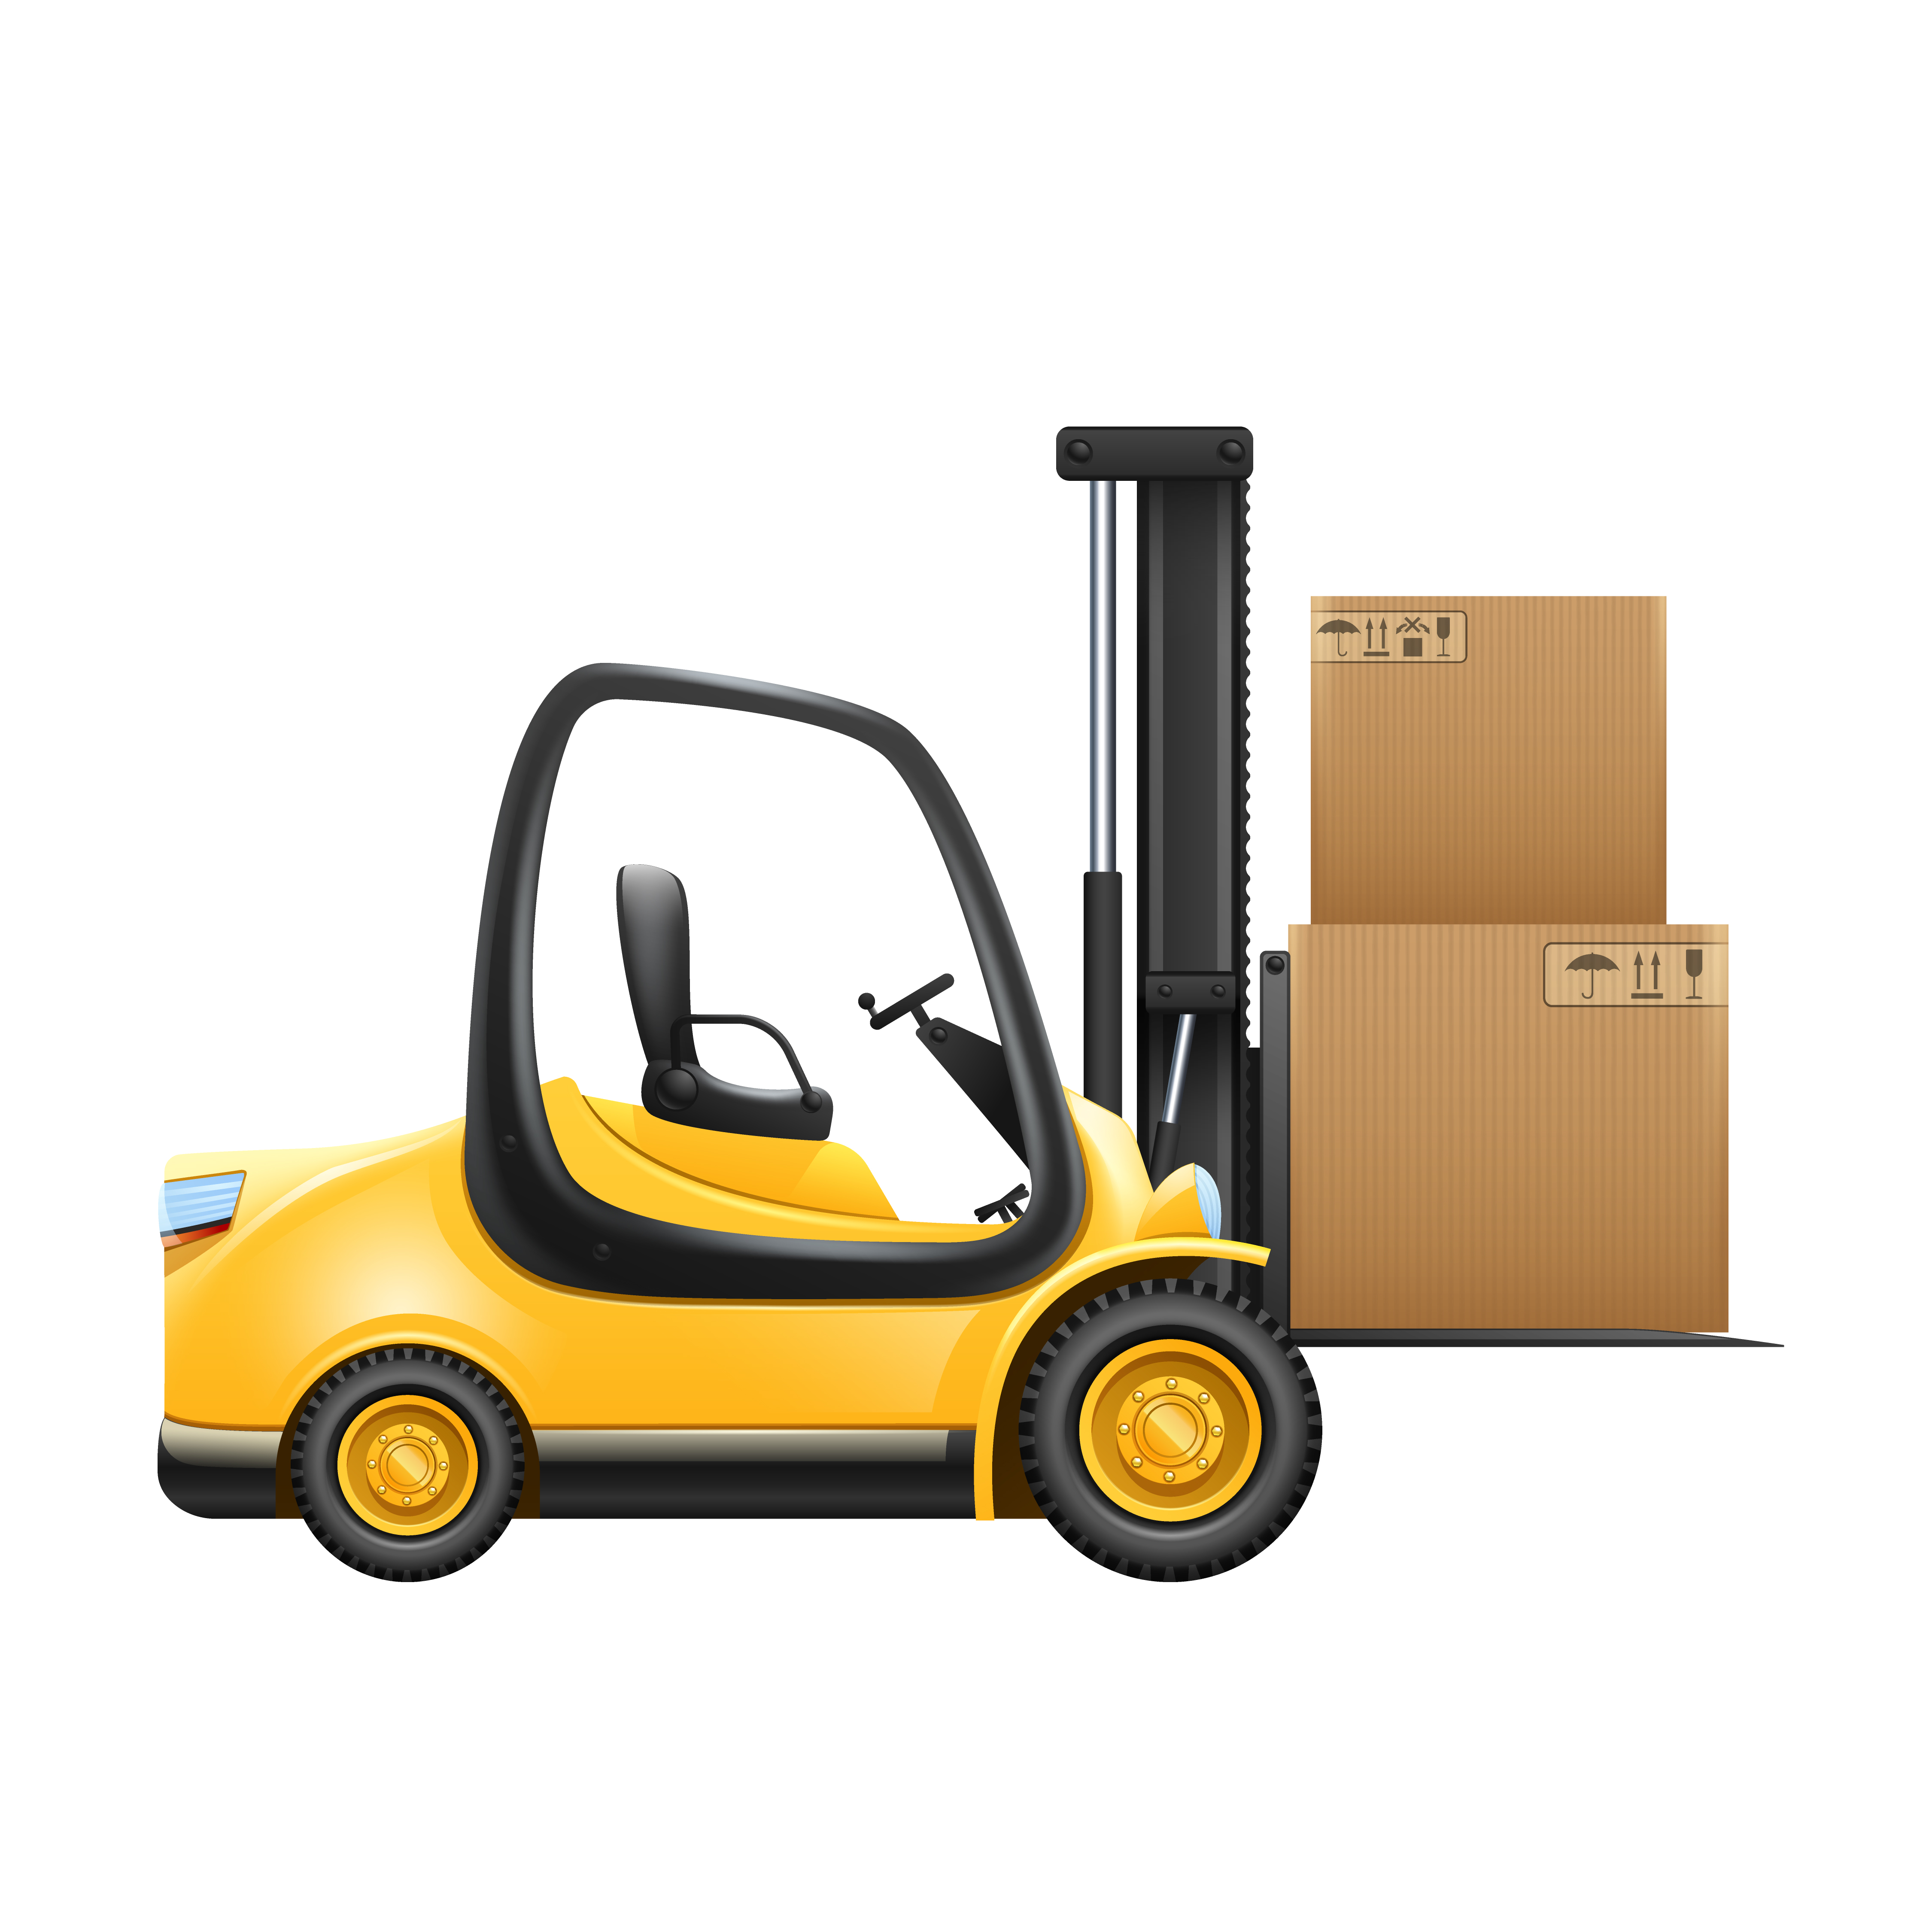 Lift Truck With Box - Download Free Vectors, Clipart ...